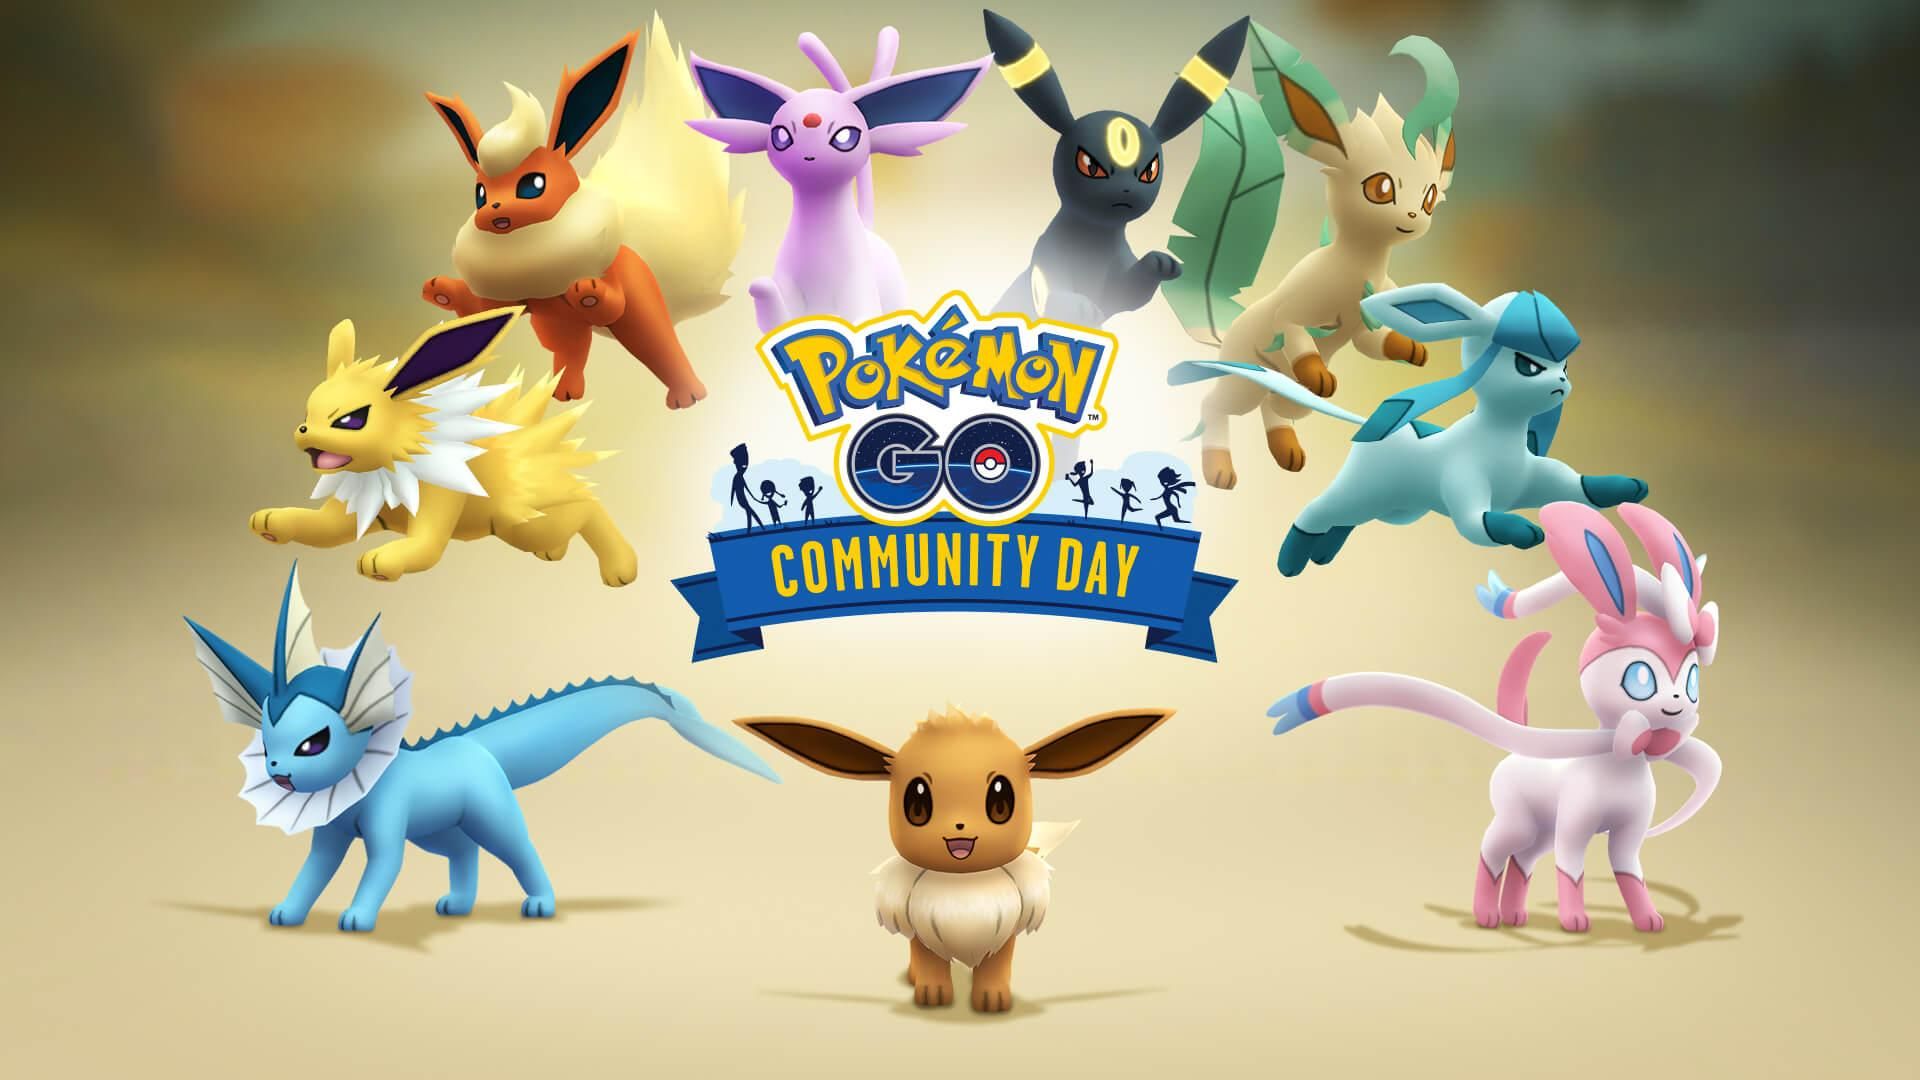 Pokemon Go Hints and Tips: The Eevee Evolution Secret - HubPages